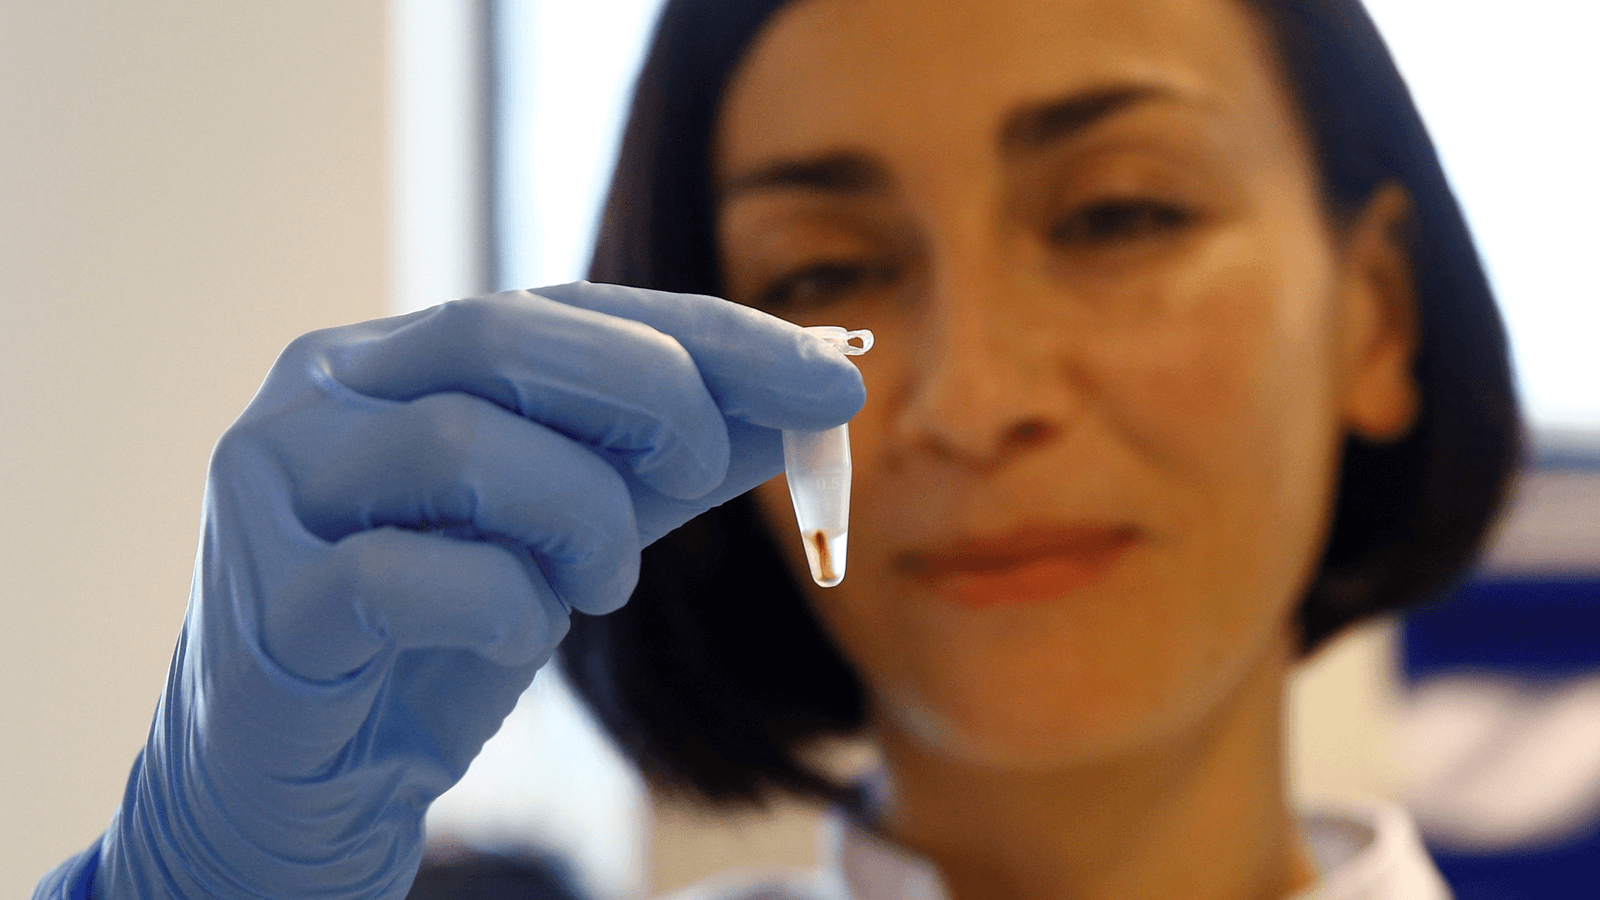 DNA testing in The Hague